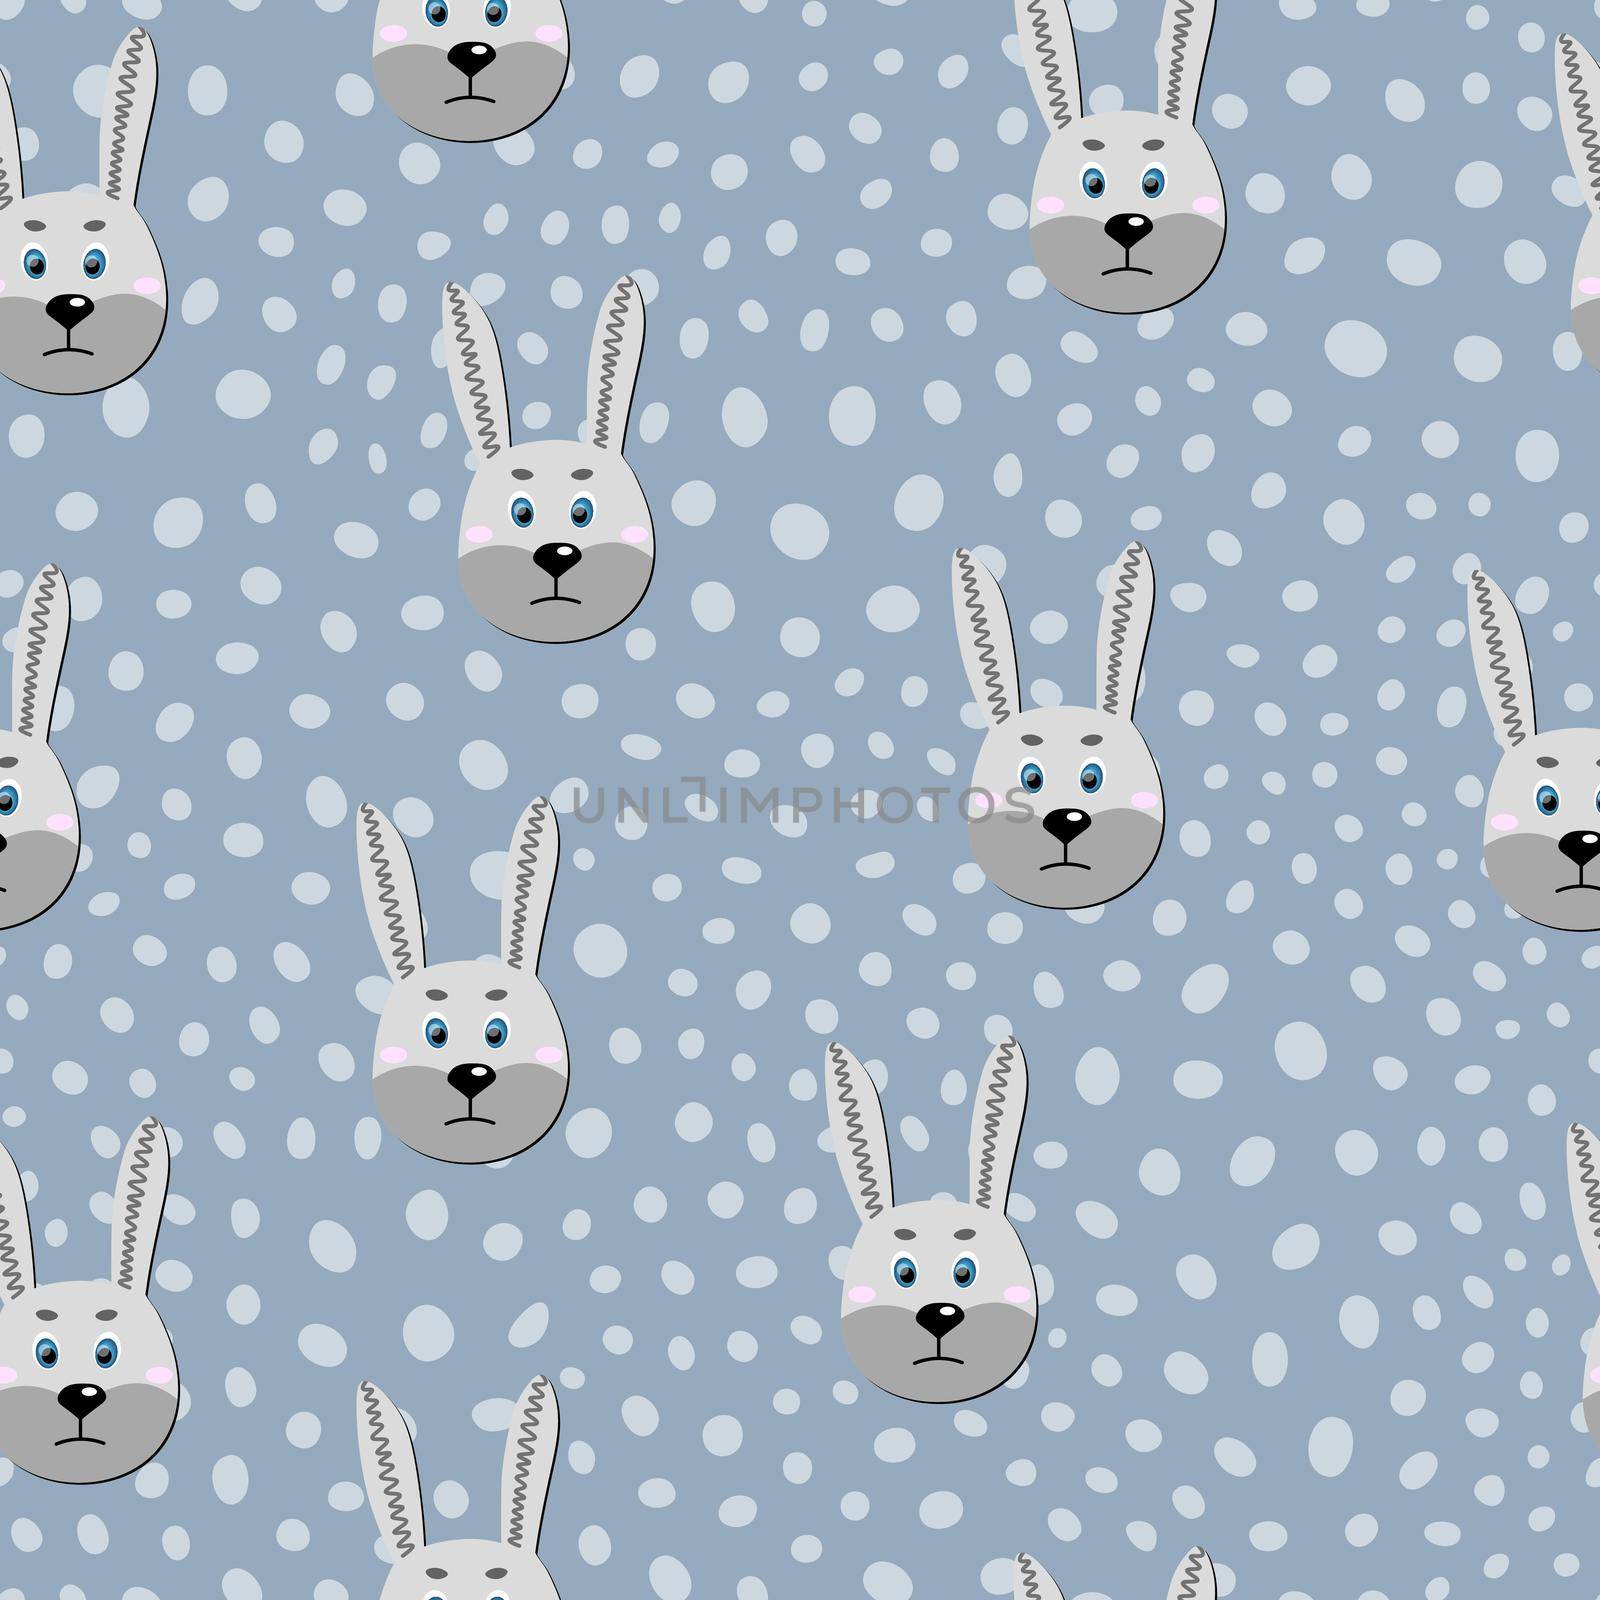 Vector flat animals colorful illustration for kids. Seamless pattern with cute hare face on blue polka dots background. Adorable cartoon character. Design for card, poster, fabric, textile. Rabbit